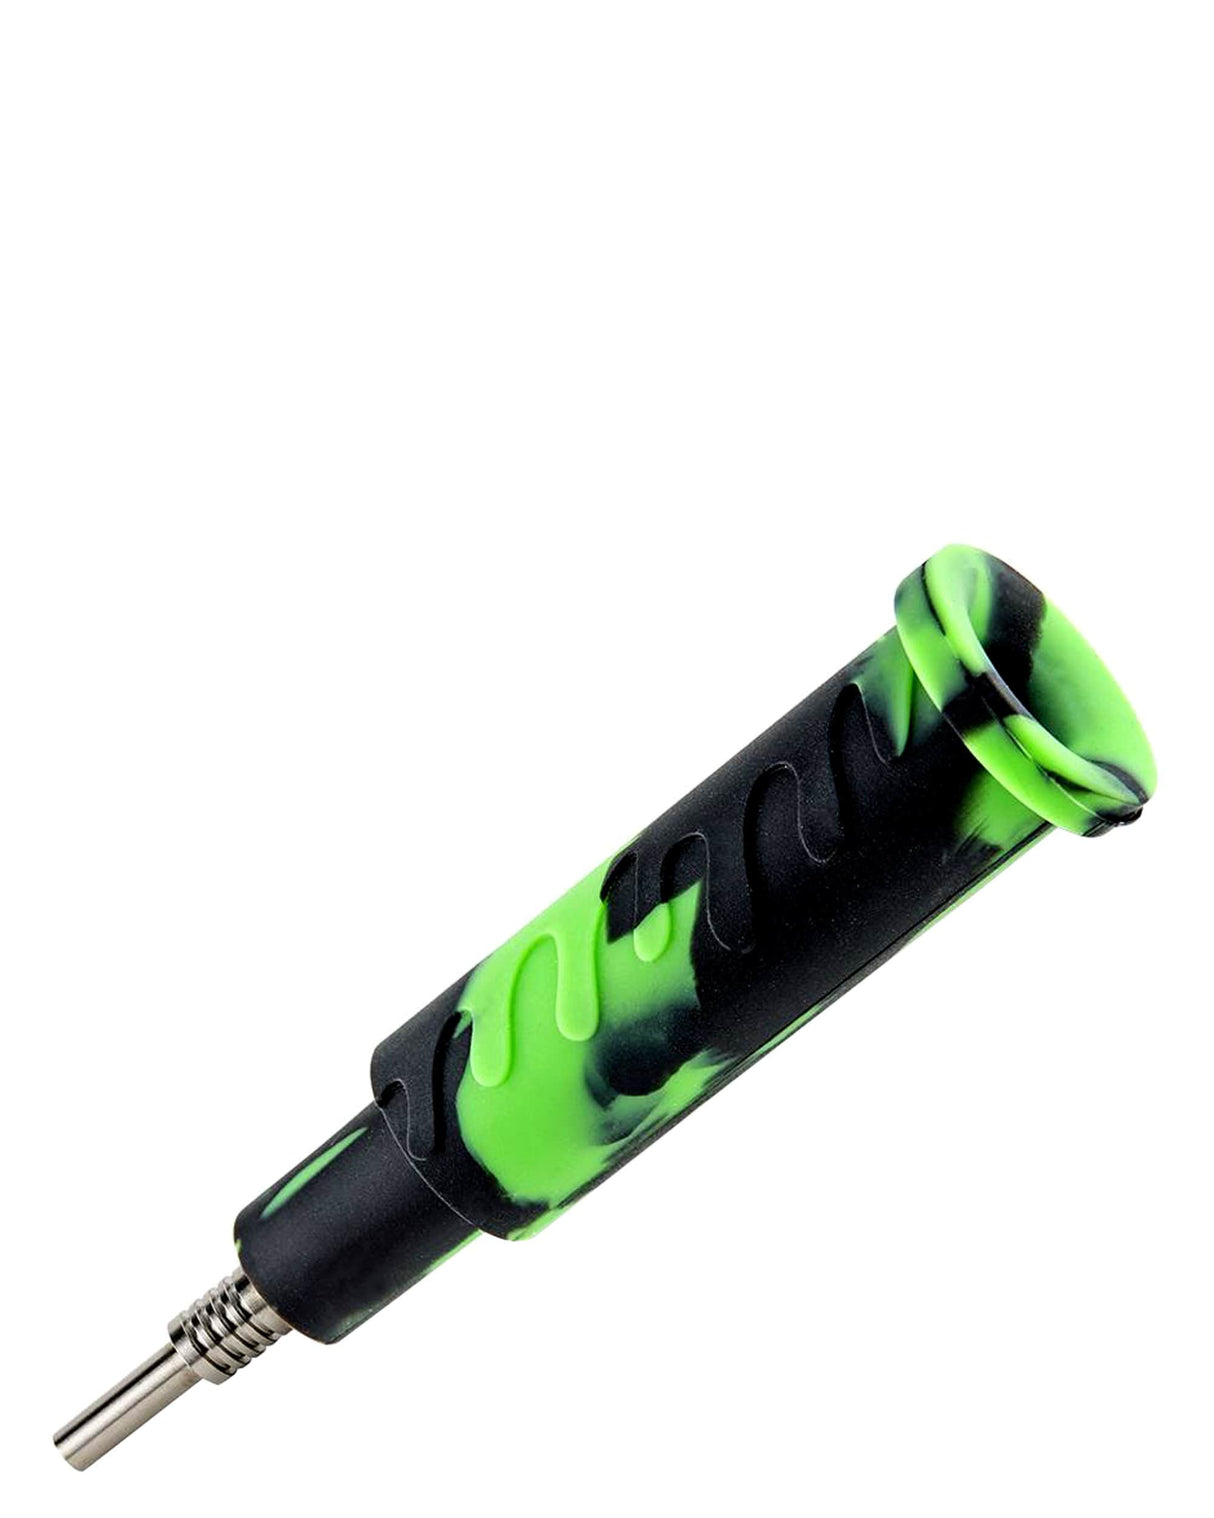 Ooze Cranium Bong & Dab Rig in black and green with titanium nail, side view on white background